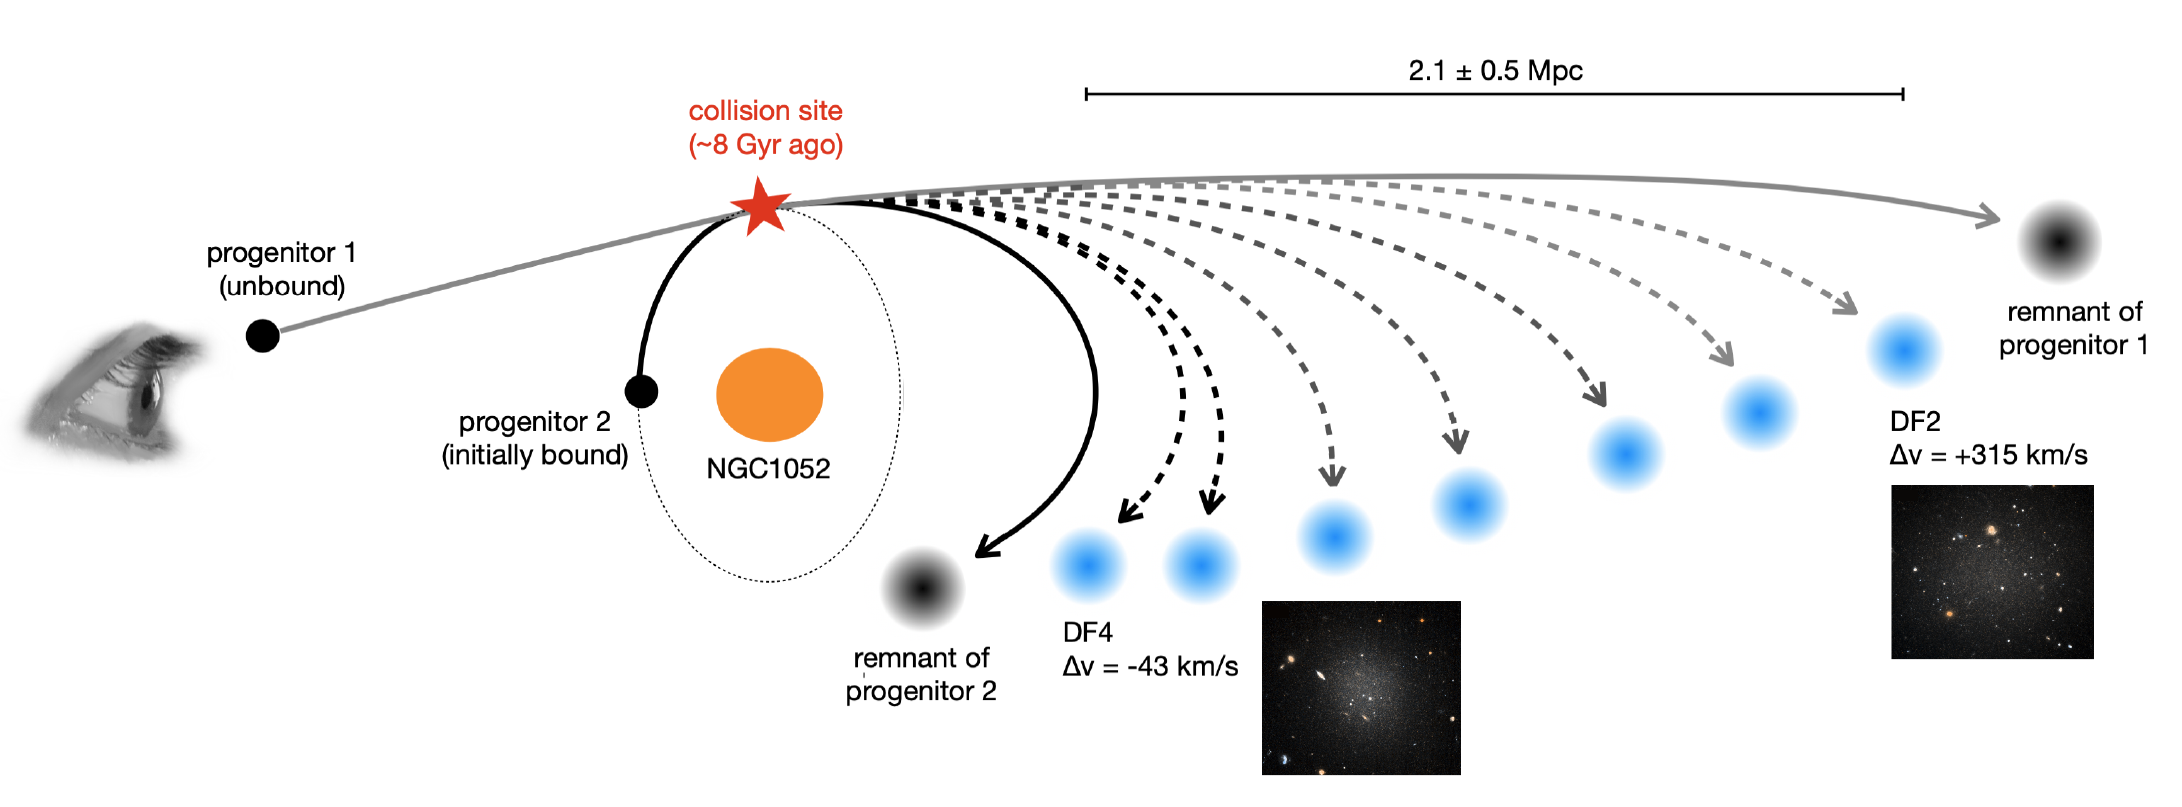 Schematic diagram, showing a galaxy ("progenitor 1") approaching a second galaxy ("progenitor 2"), which is orbiting around a group ("NGC1052"). A point in the orbit of progenitor 2 is labelled as the collision site of these two galaxies. These two galaxies are then shown to split into seven smaller objects, plus two that are labelled as "remnants", coloured black to represent their high dark matter content.